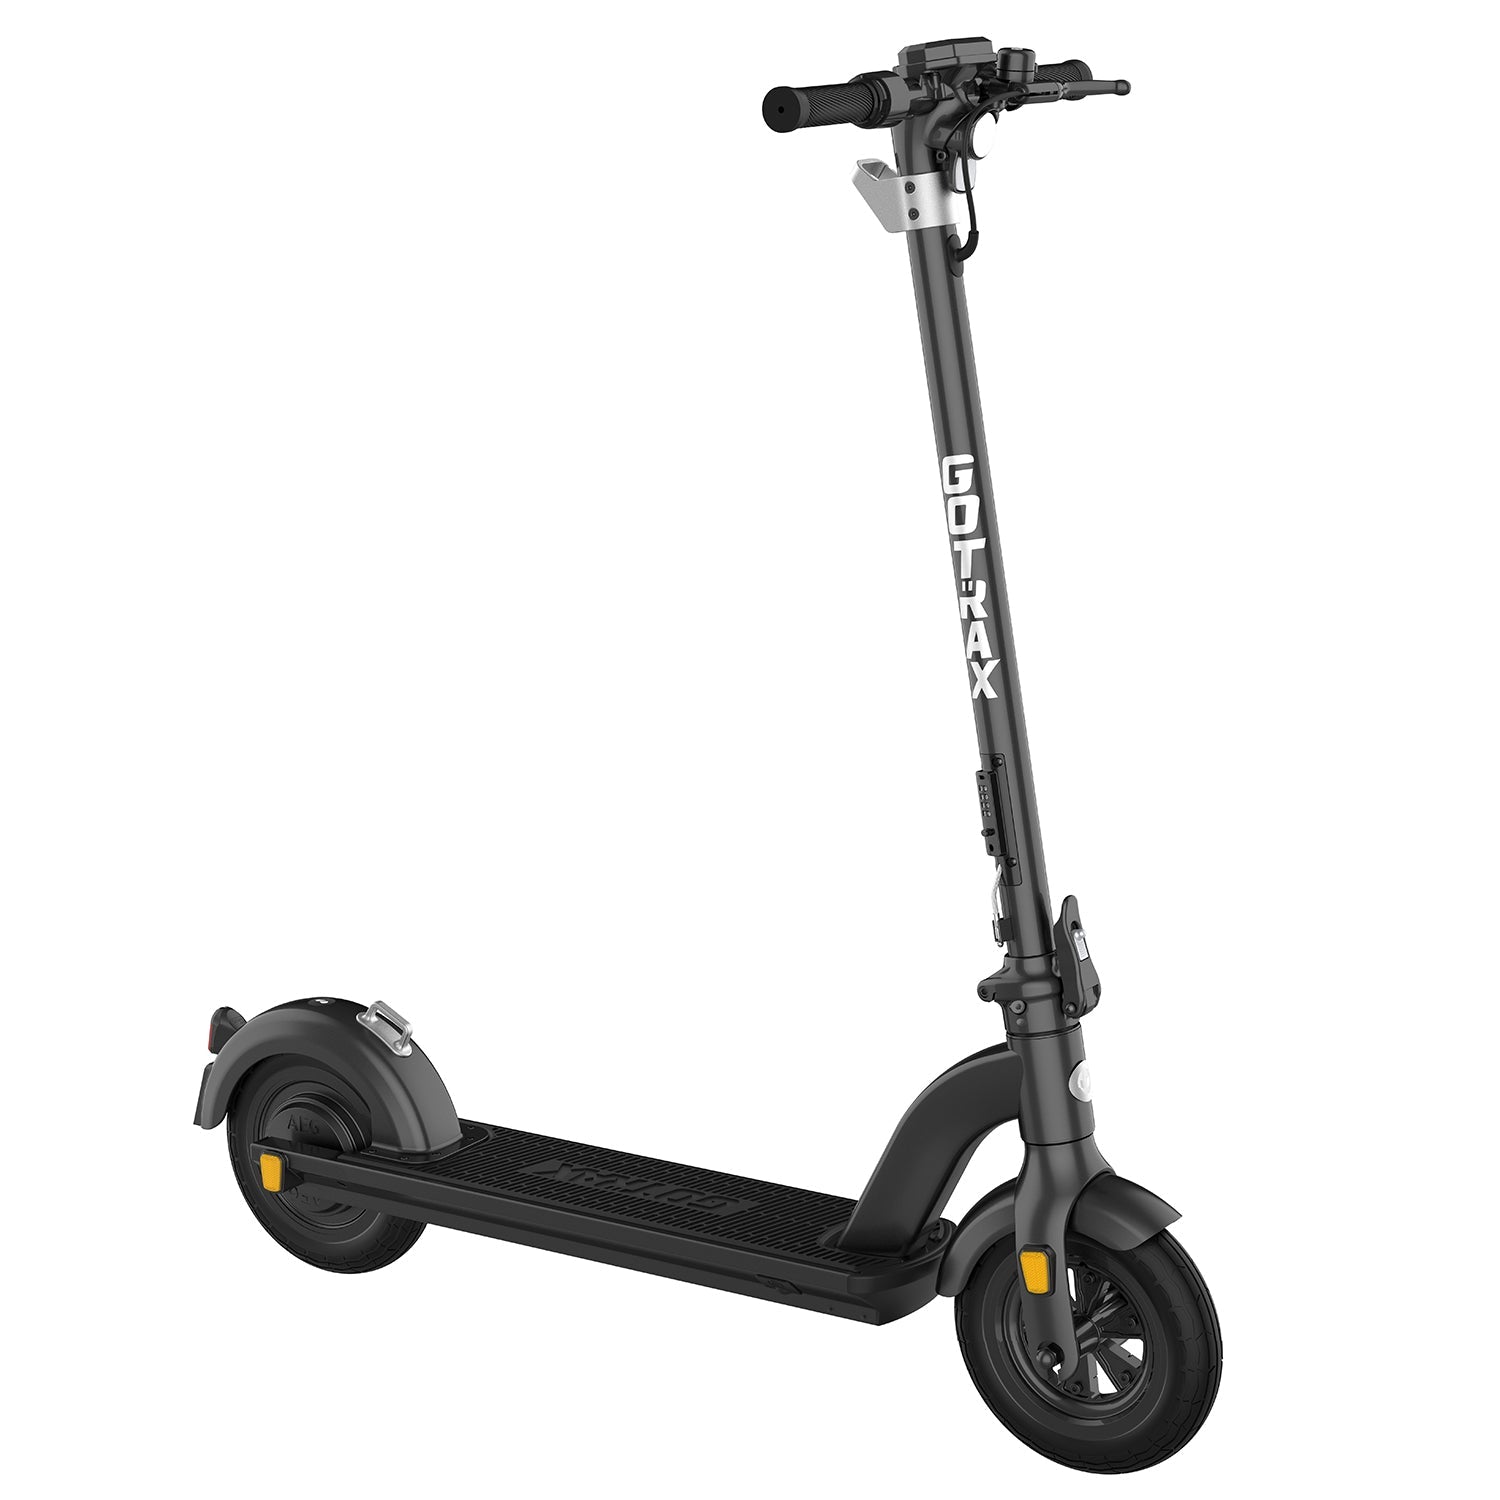 Tour XP Electric Scooter - GOTRAX